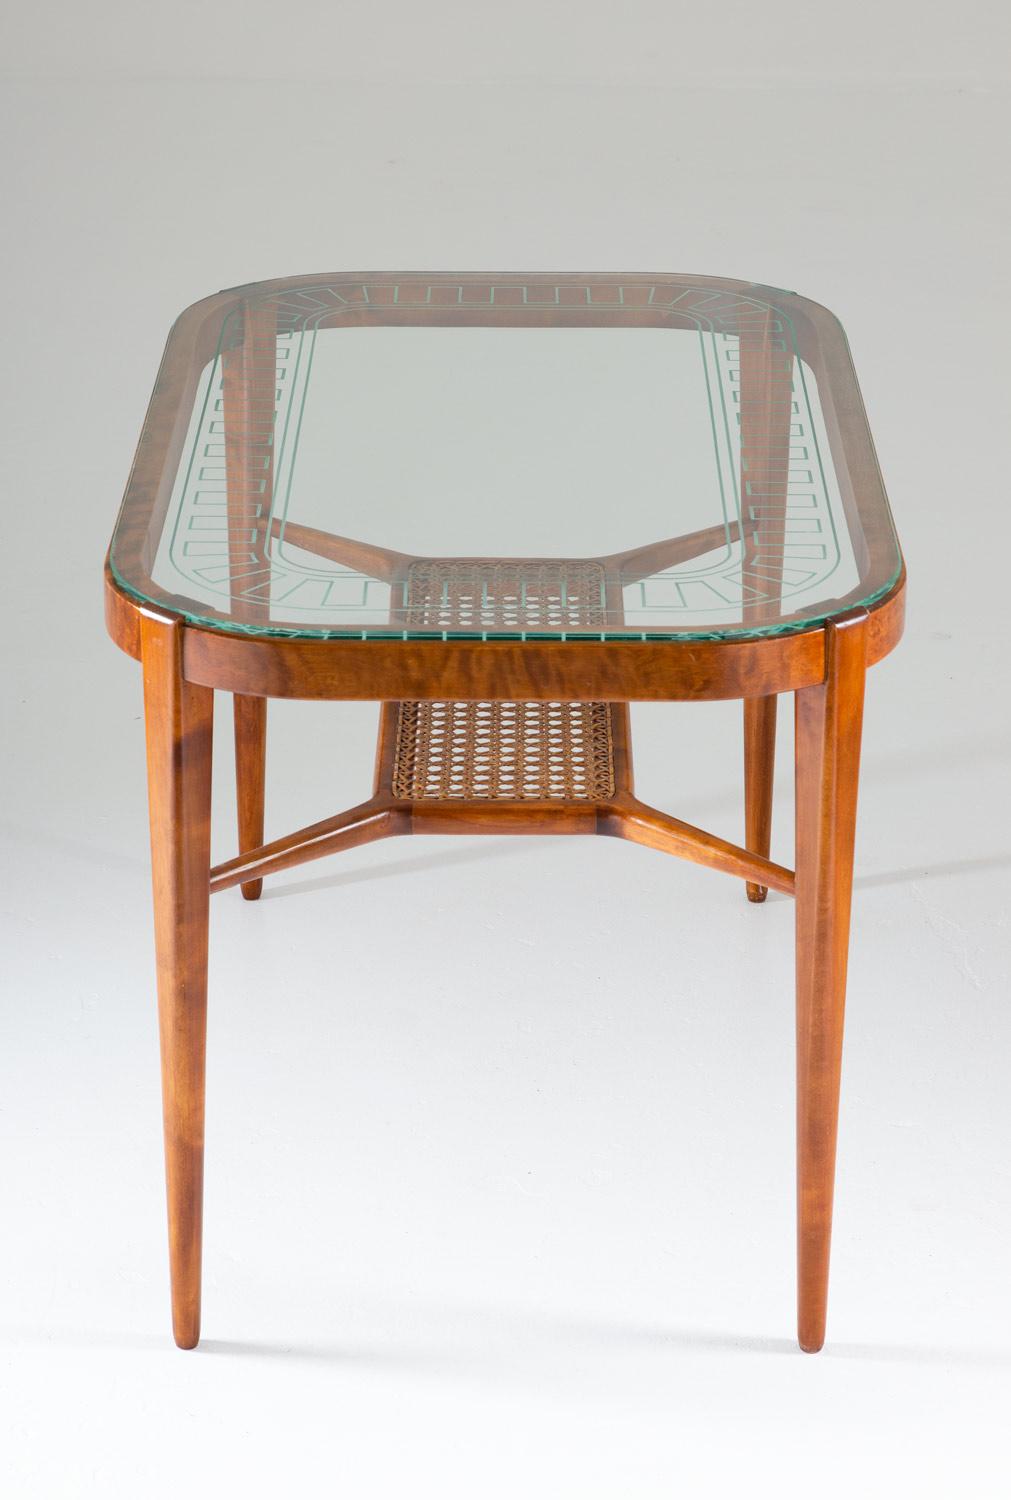 20th Century Swedish Modern Coffee Table in Birch, Glass and Rattan by Bodafors, 1940s For Sale